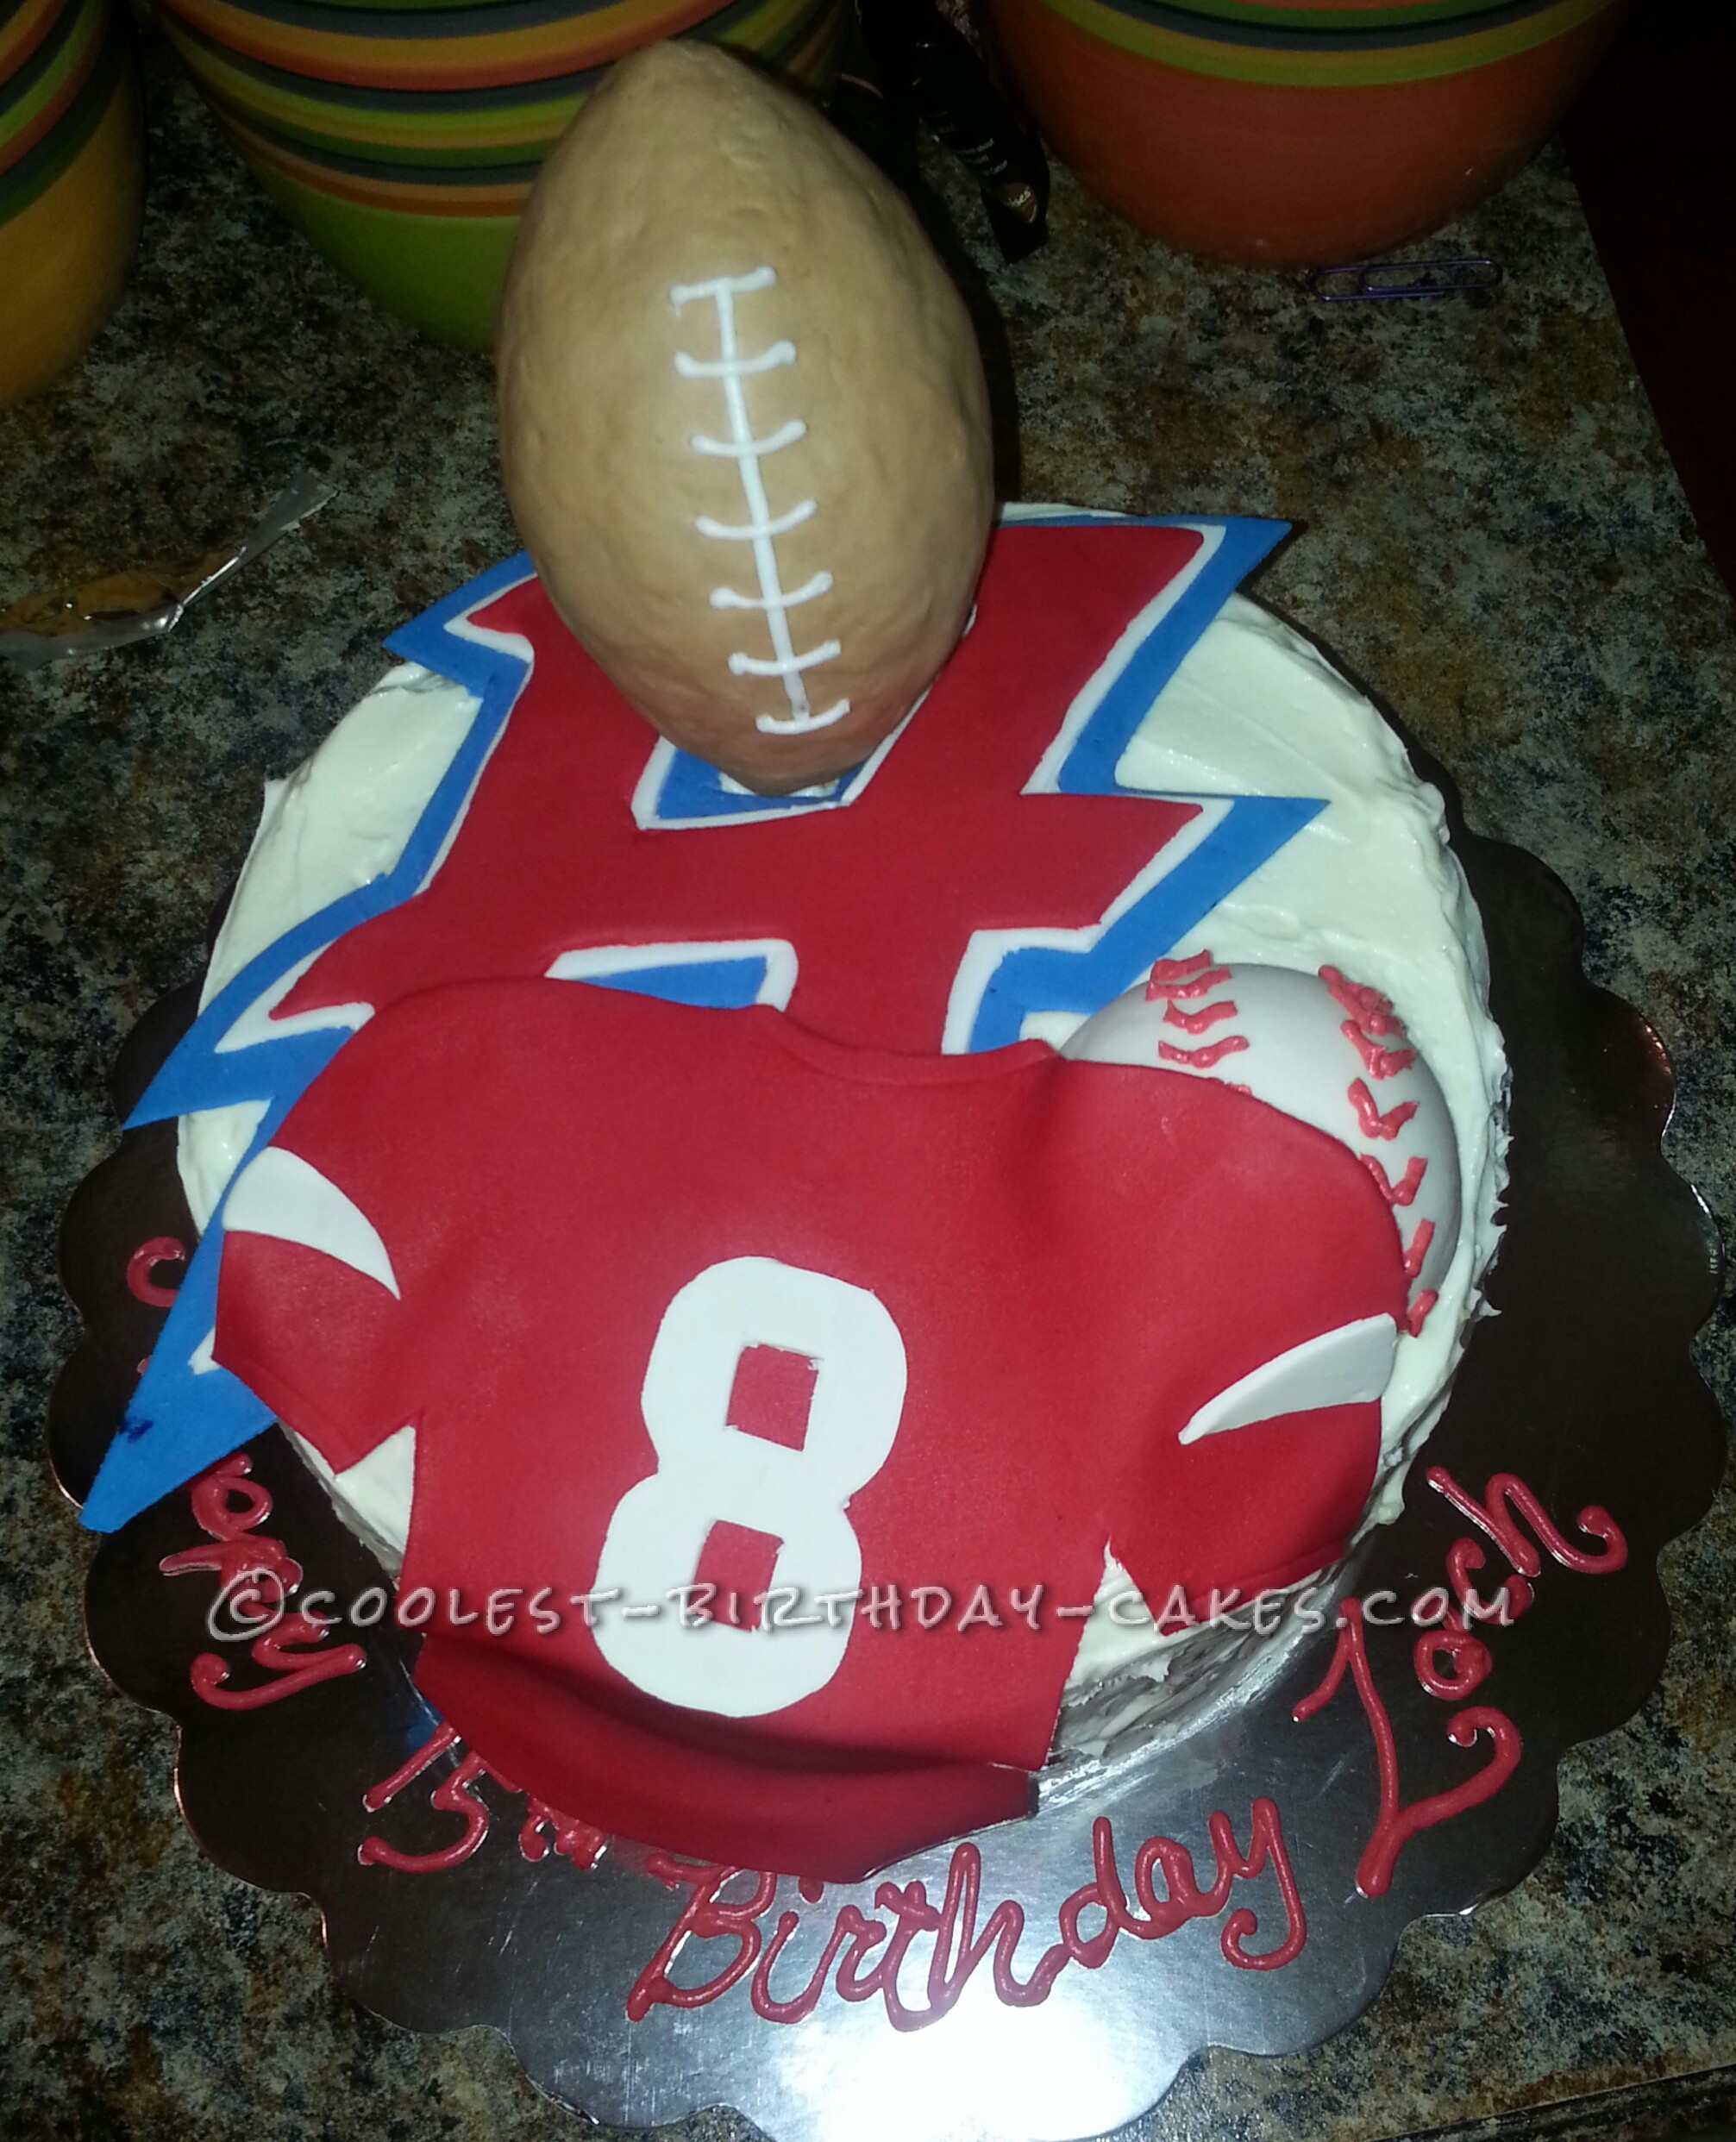 A Sports Cake for a True Athlete